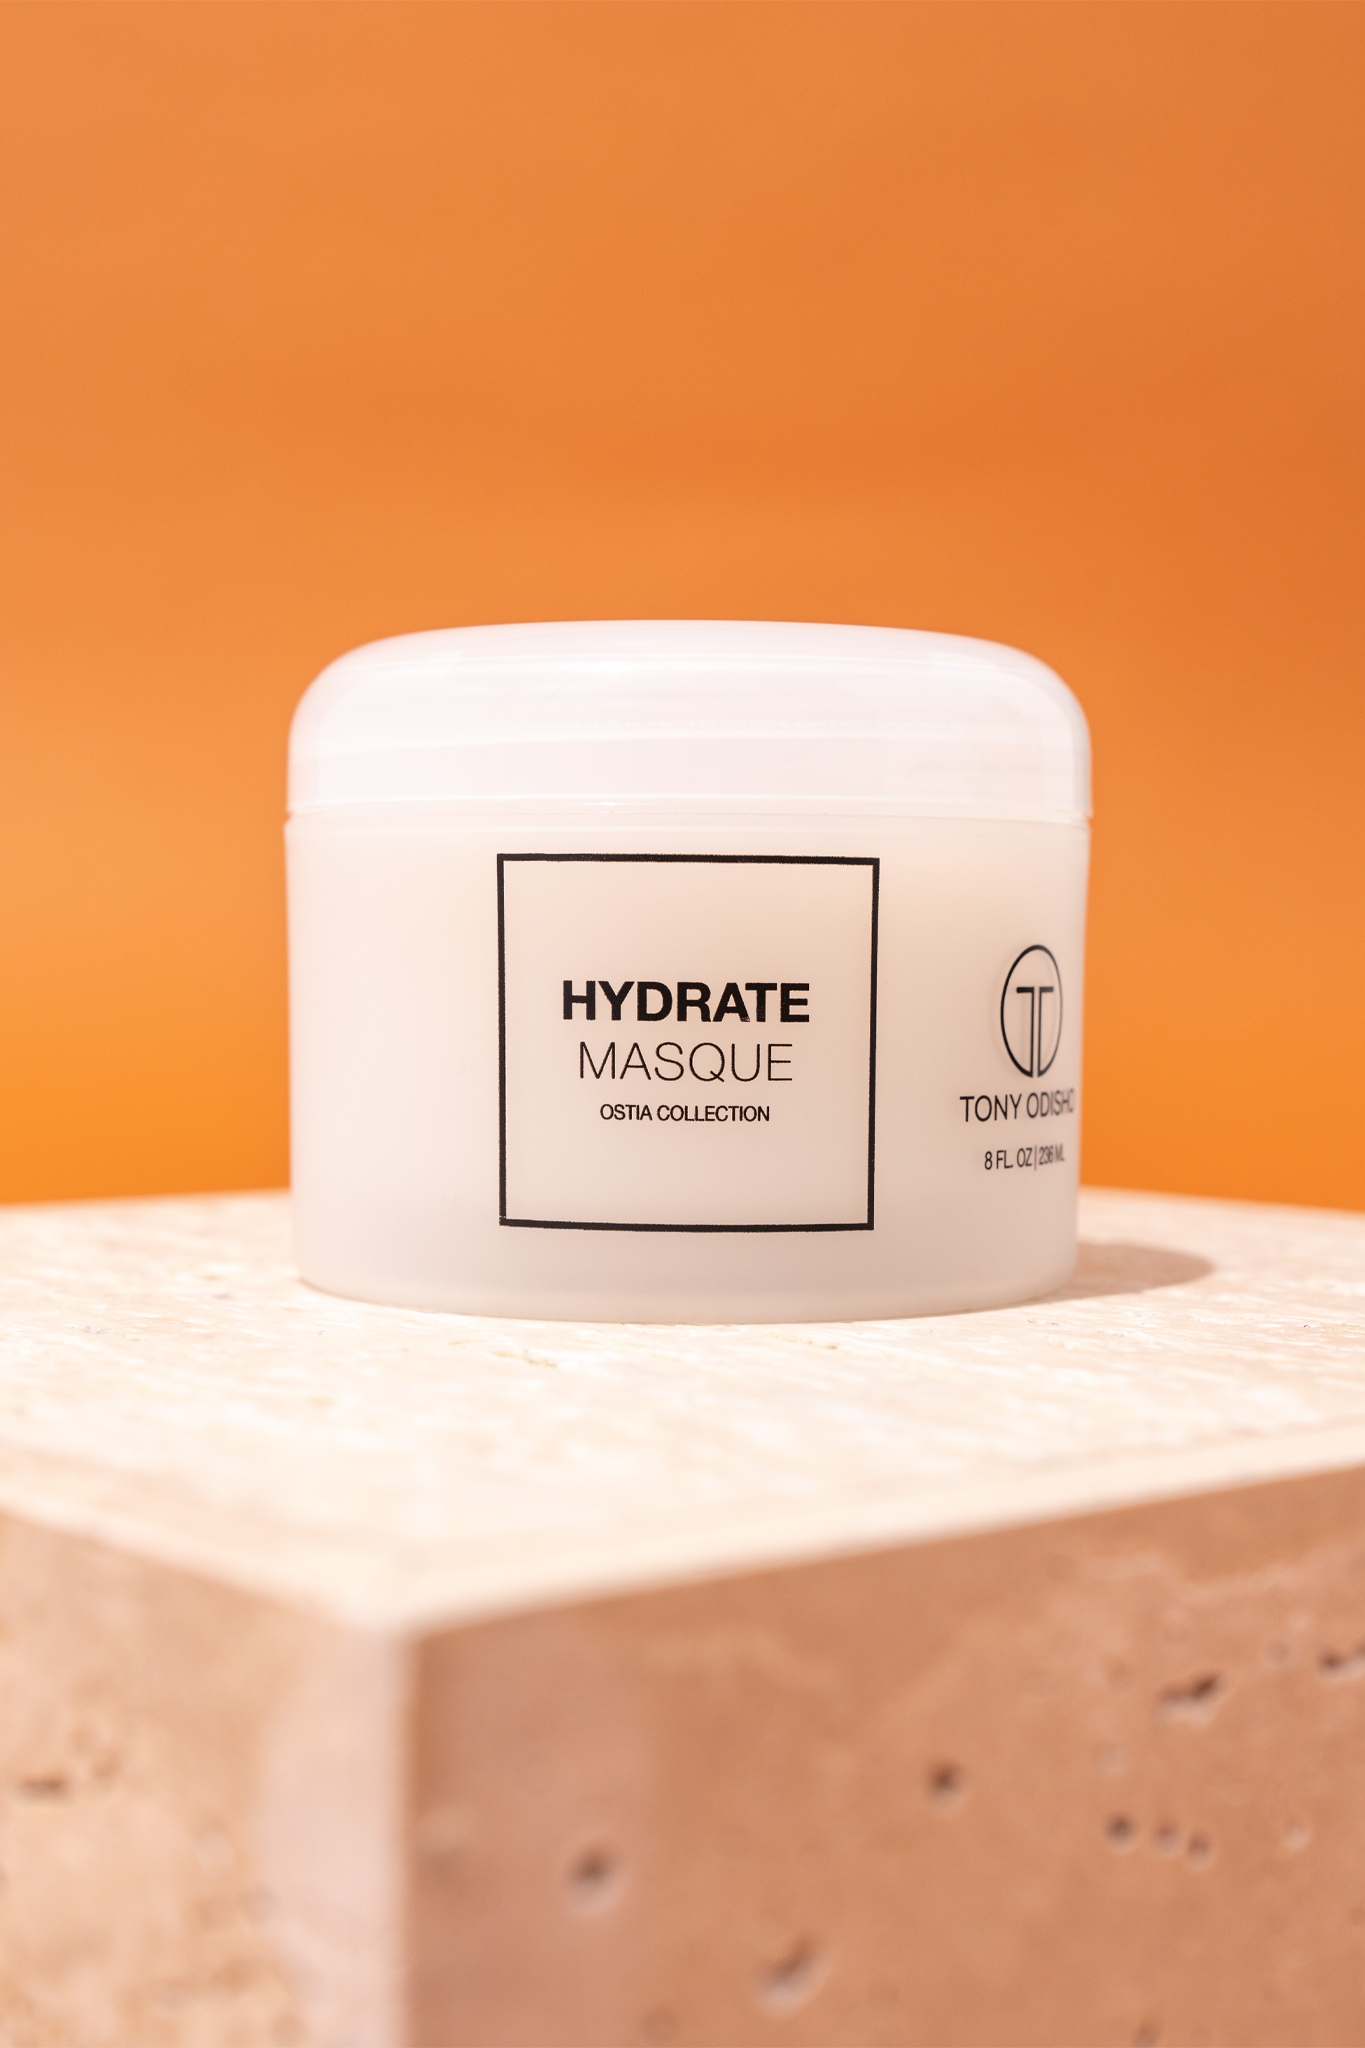 Hydrate Masque - Image 2